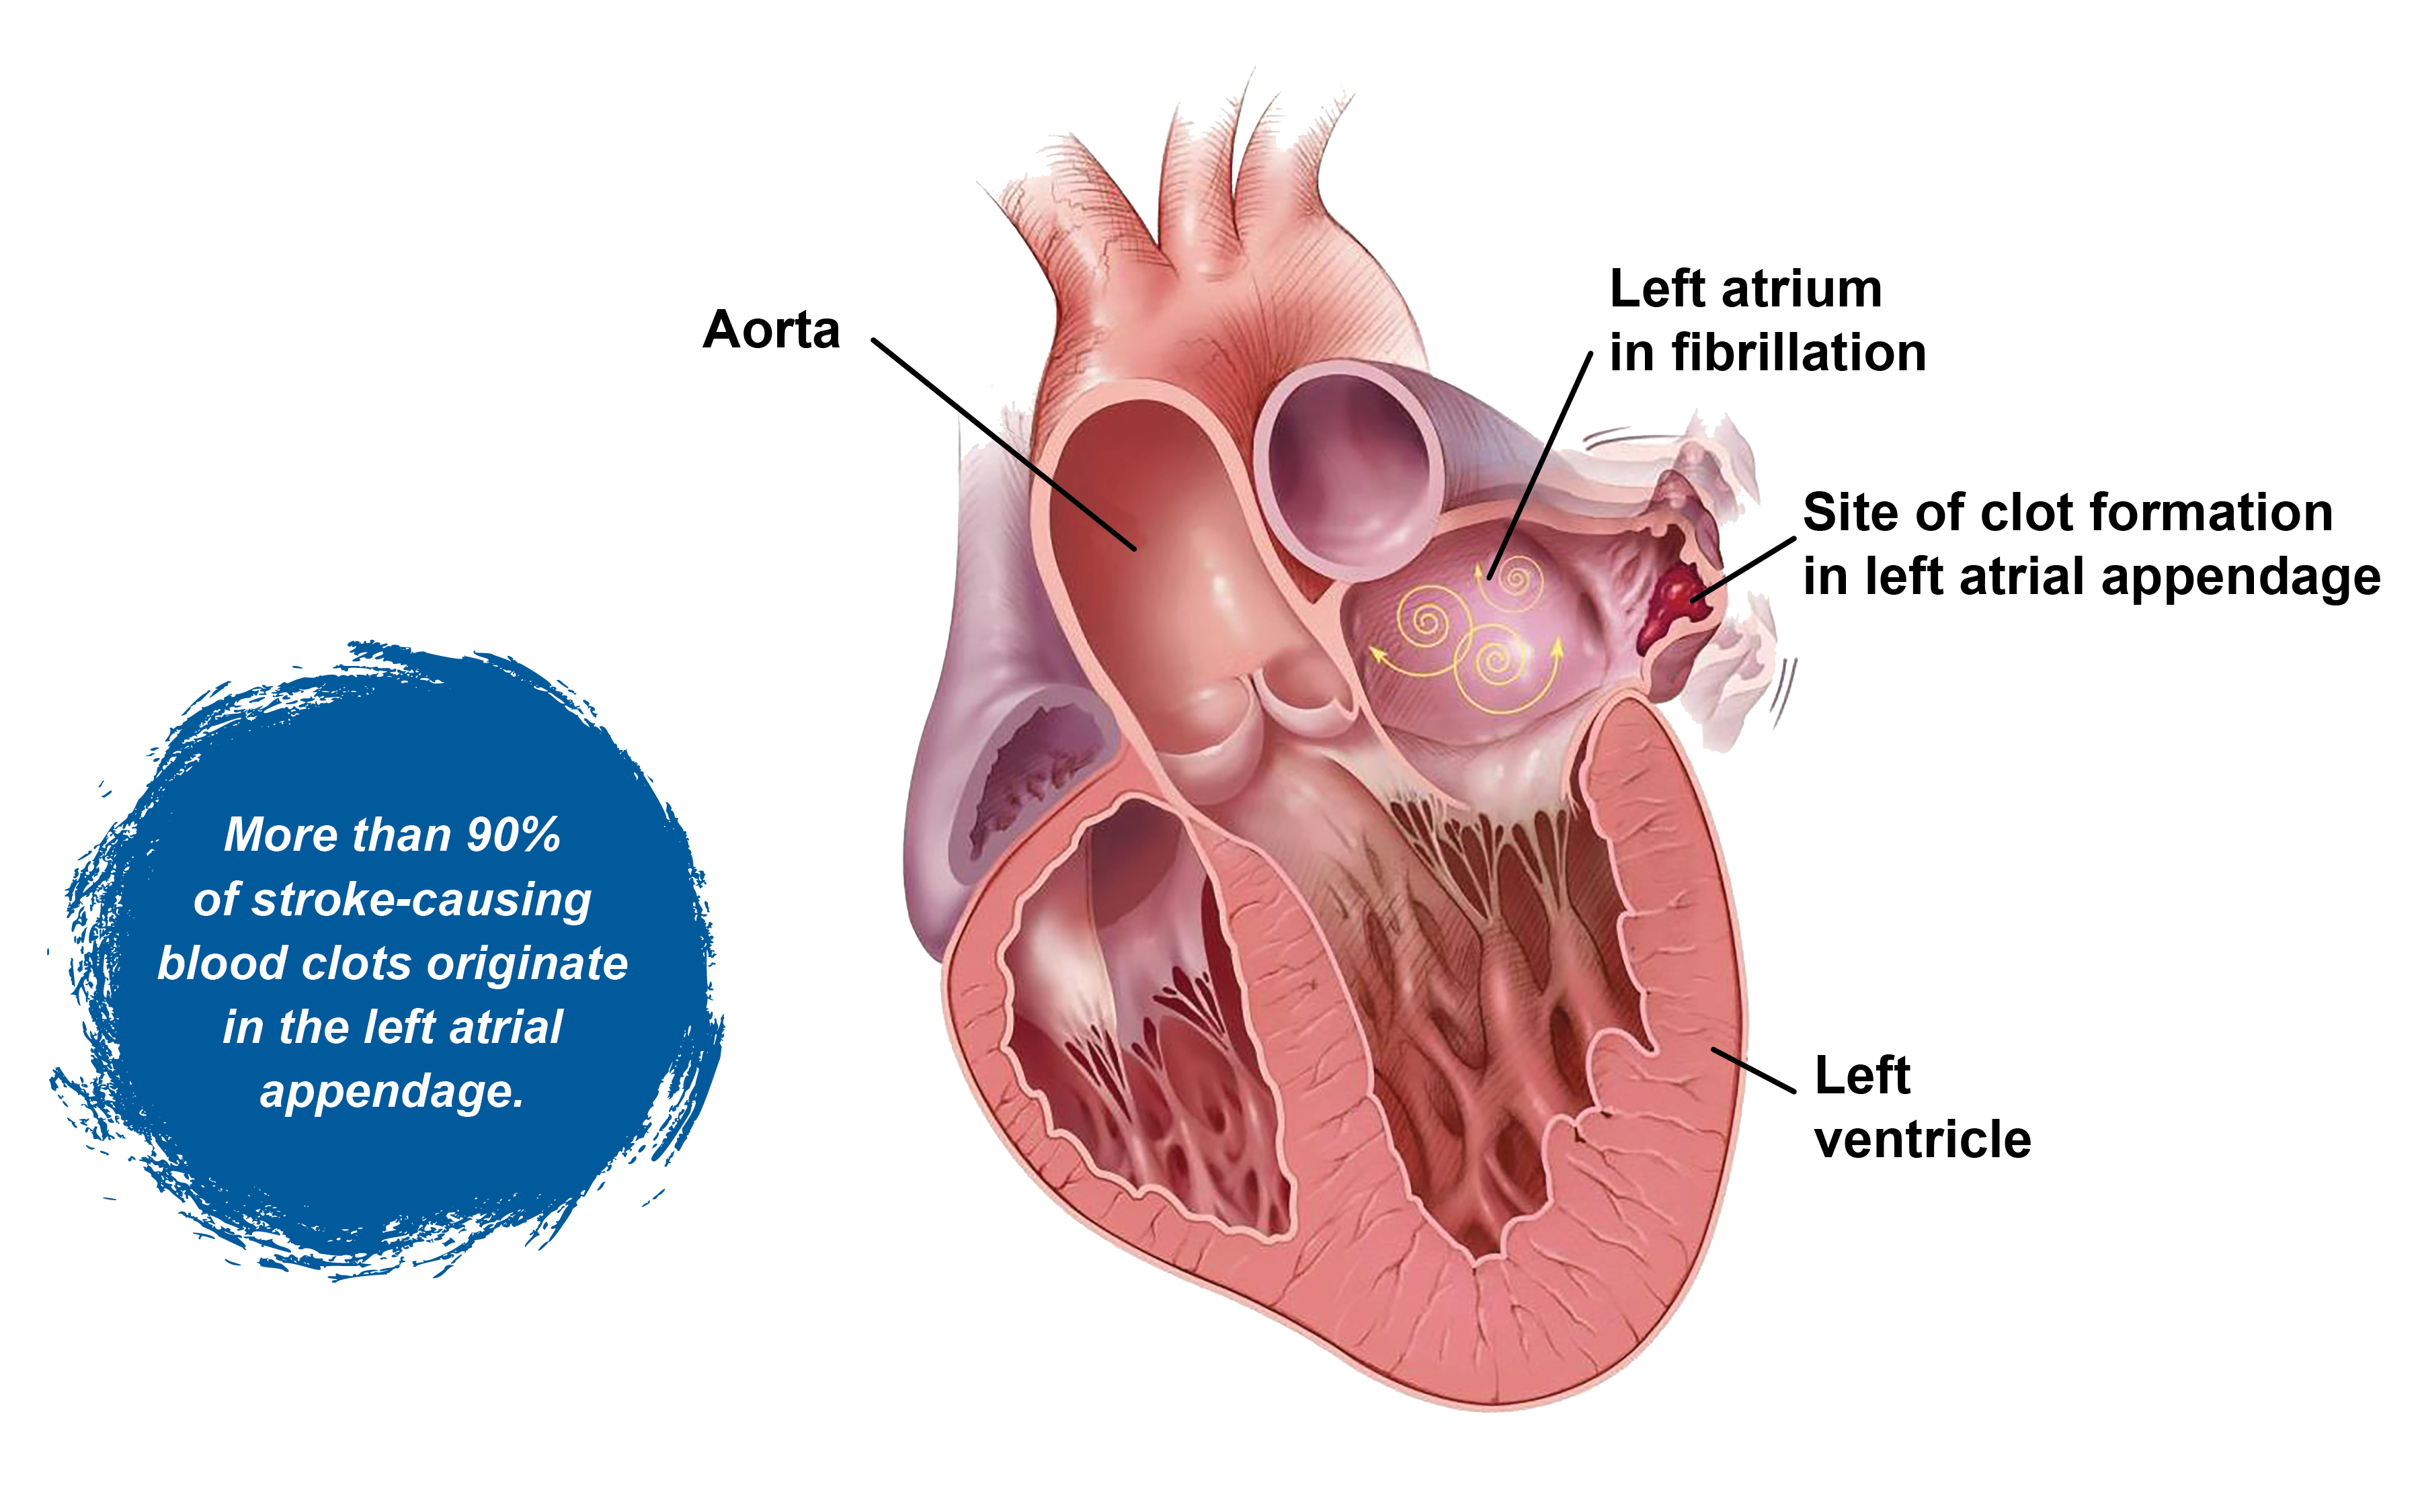 Anatomical illustration of the heart that showcases the aorta, left atrium in fibrillation, left atrial appendage and left ventricle. The image notes that more than 90% of stroke-causing blood clots originate in the left atrial appendage.